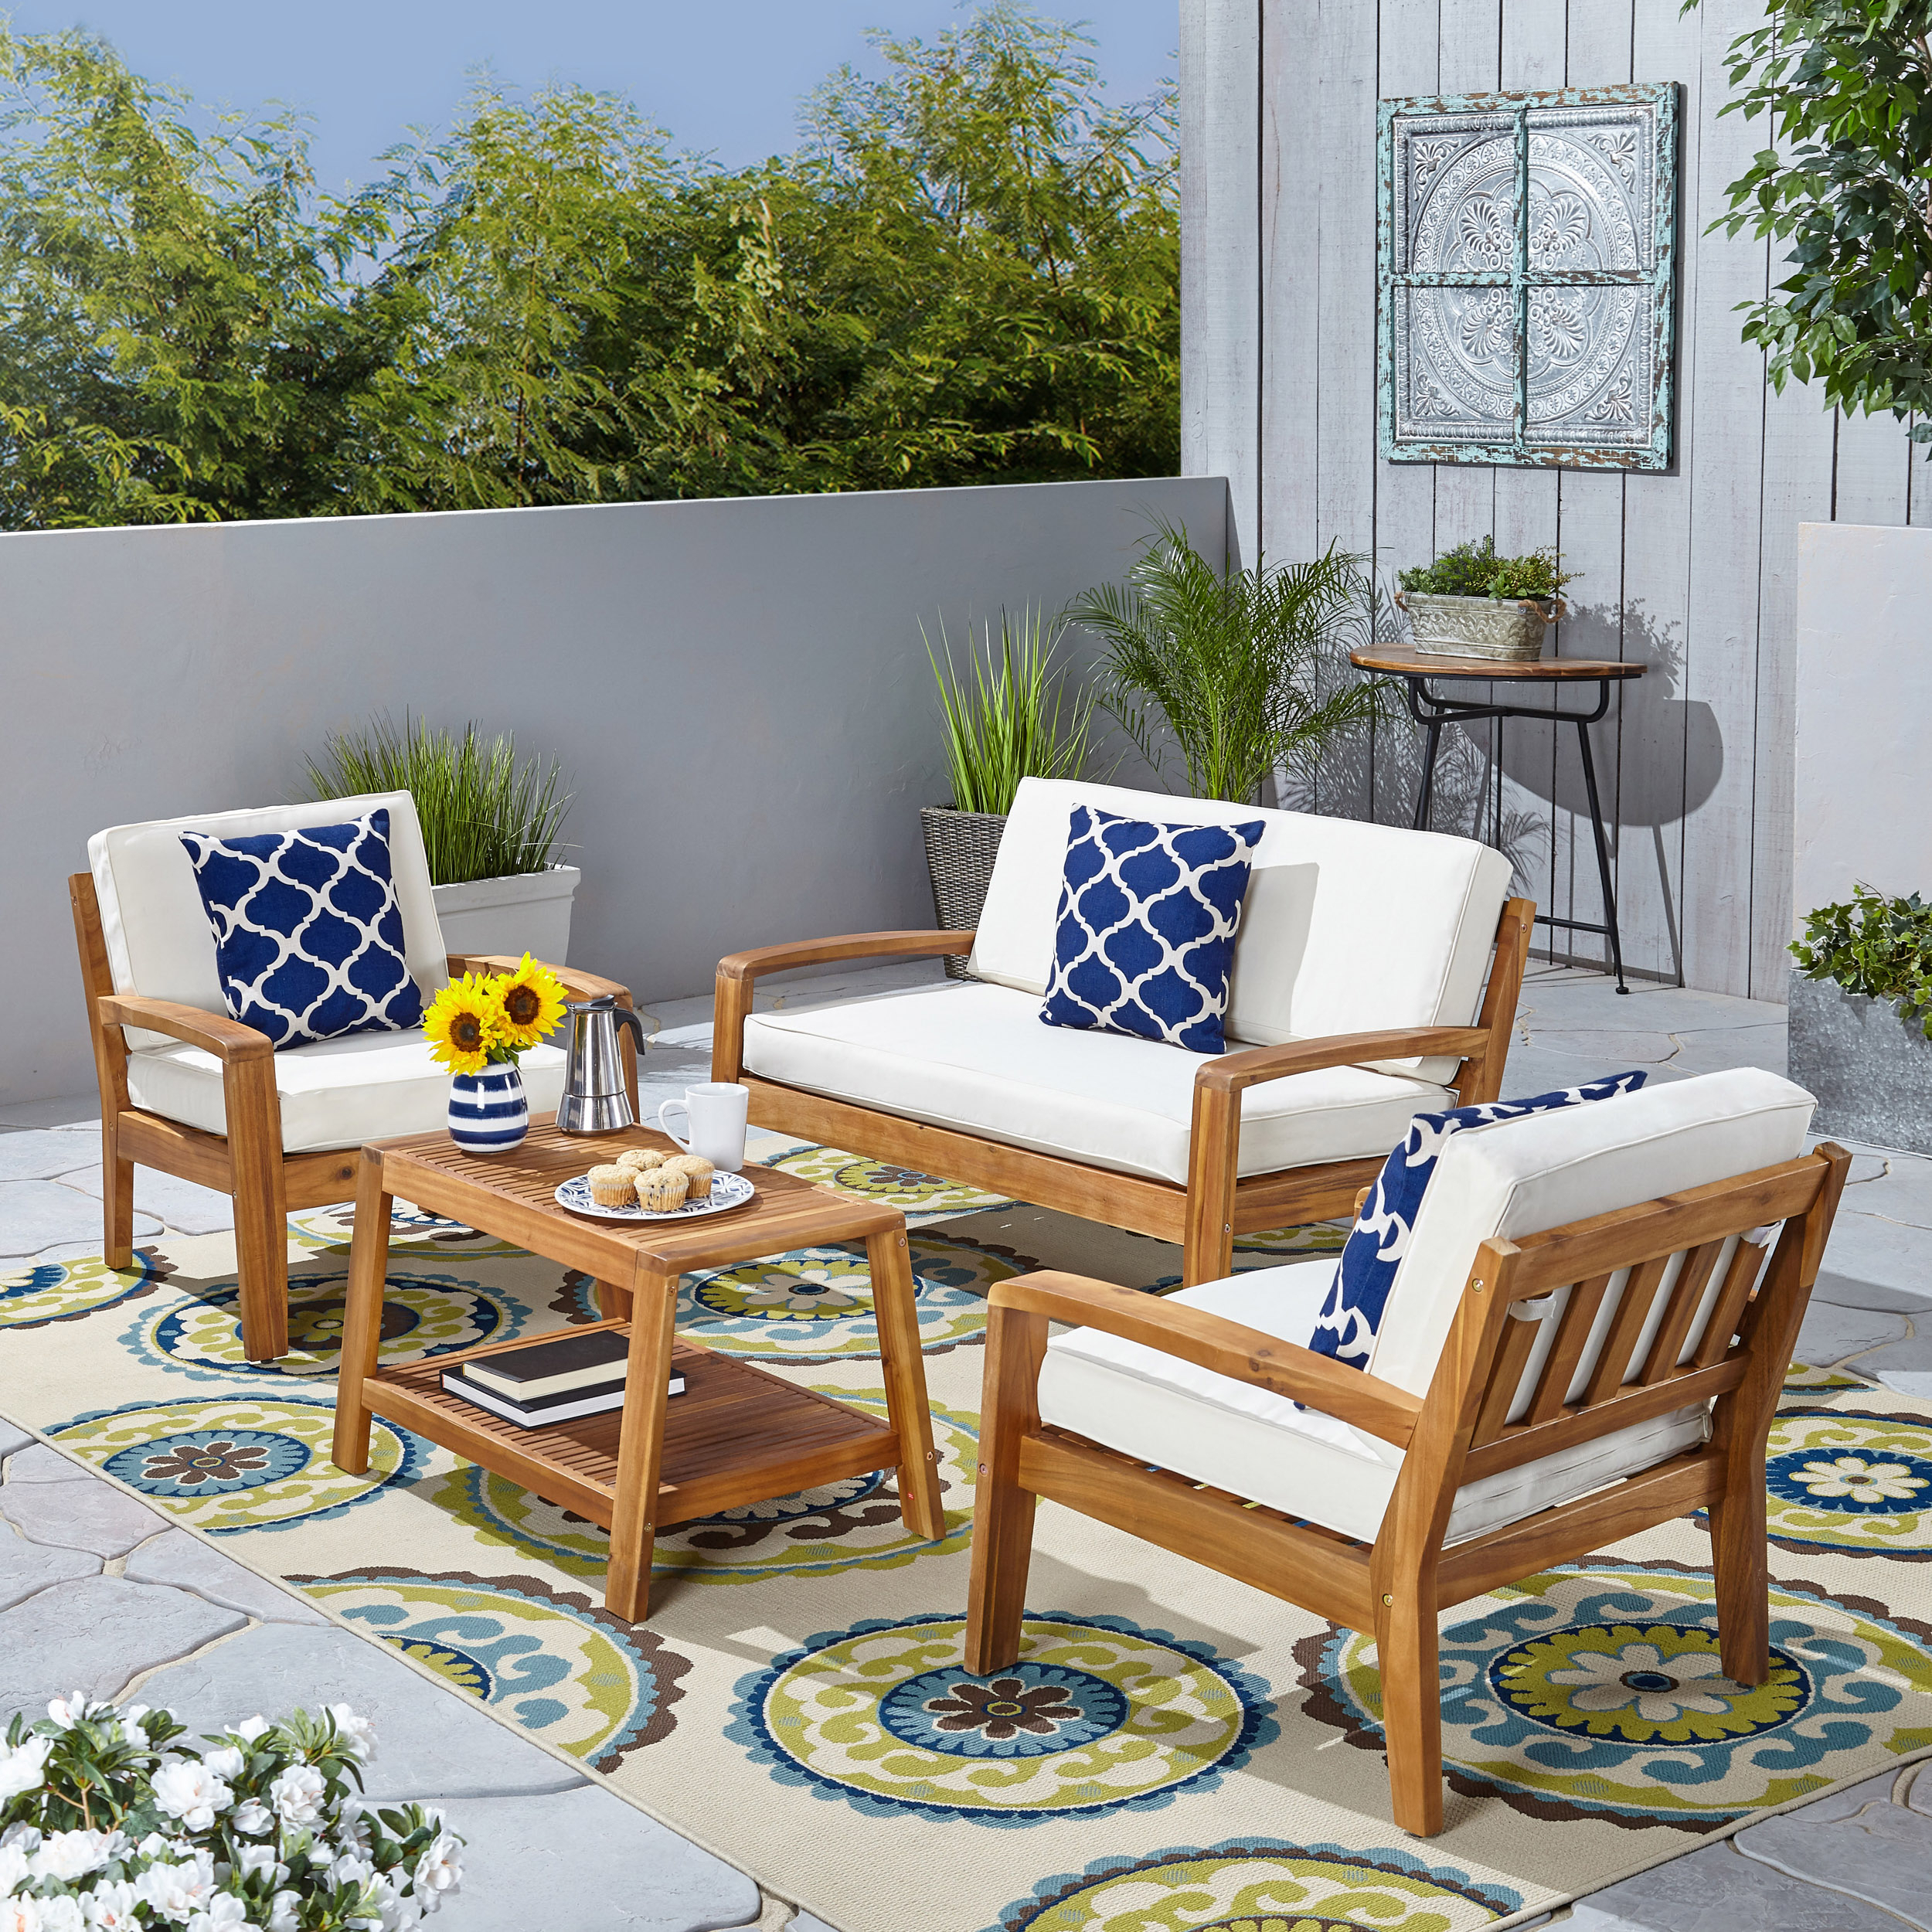 Parma 4pc Outdoor Sofa Set With Cushions - Blue